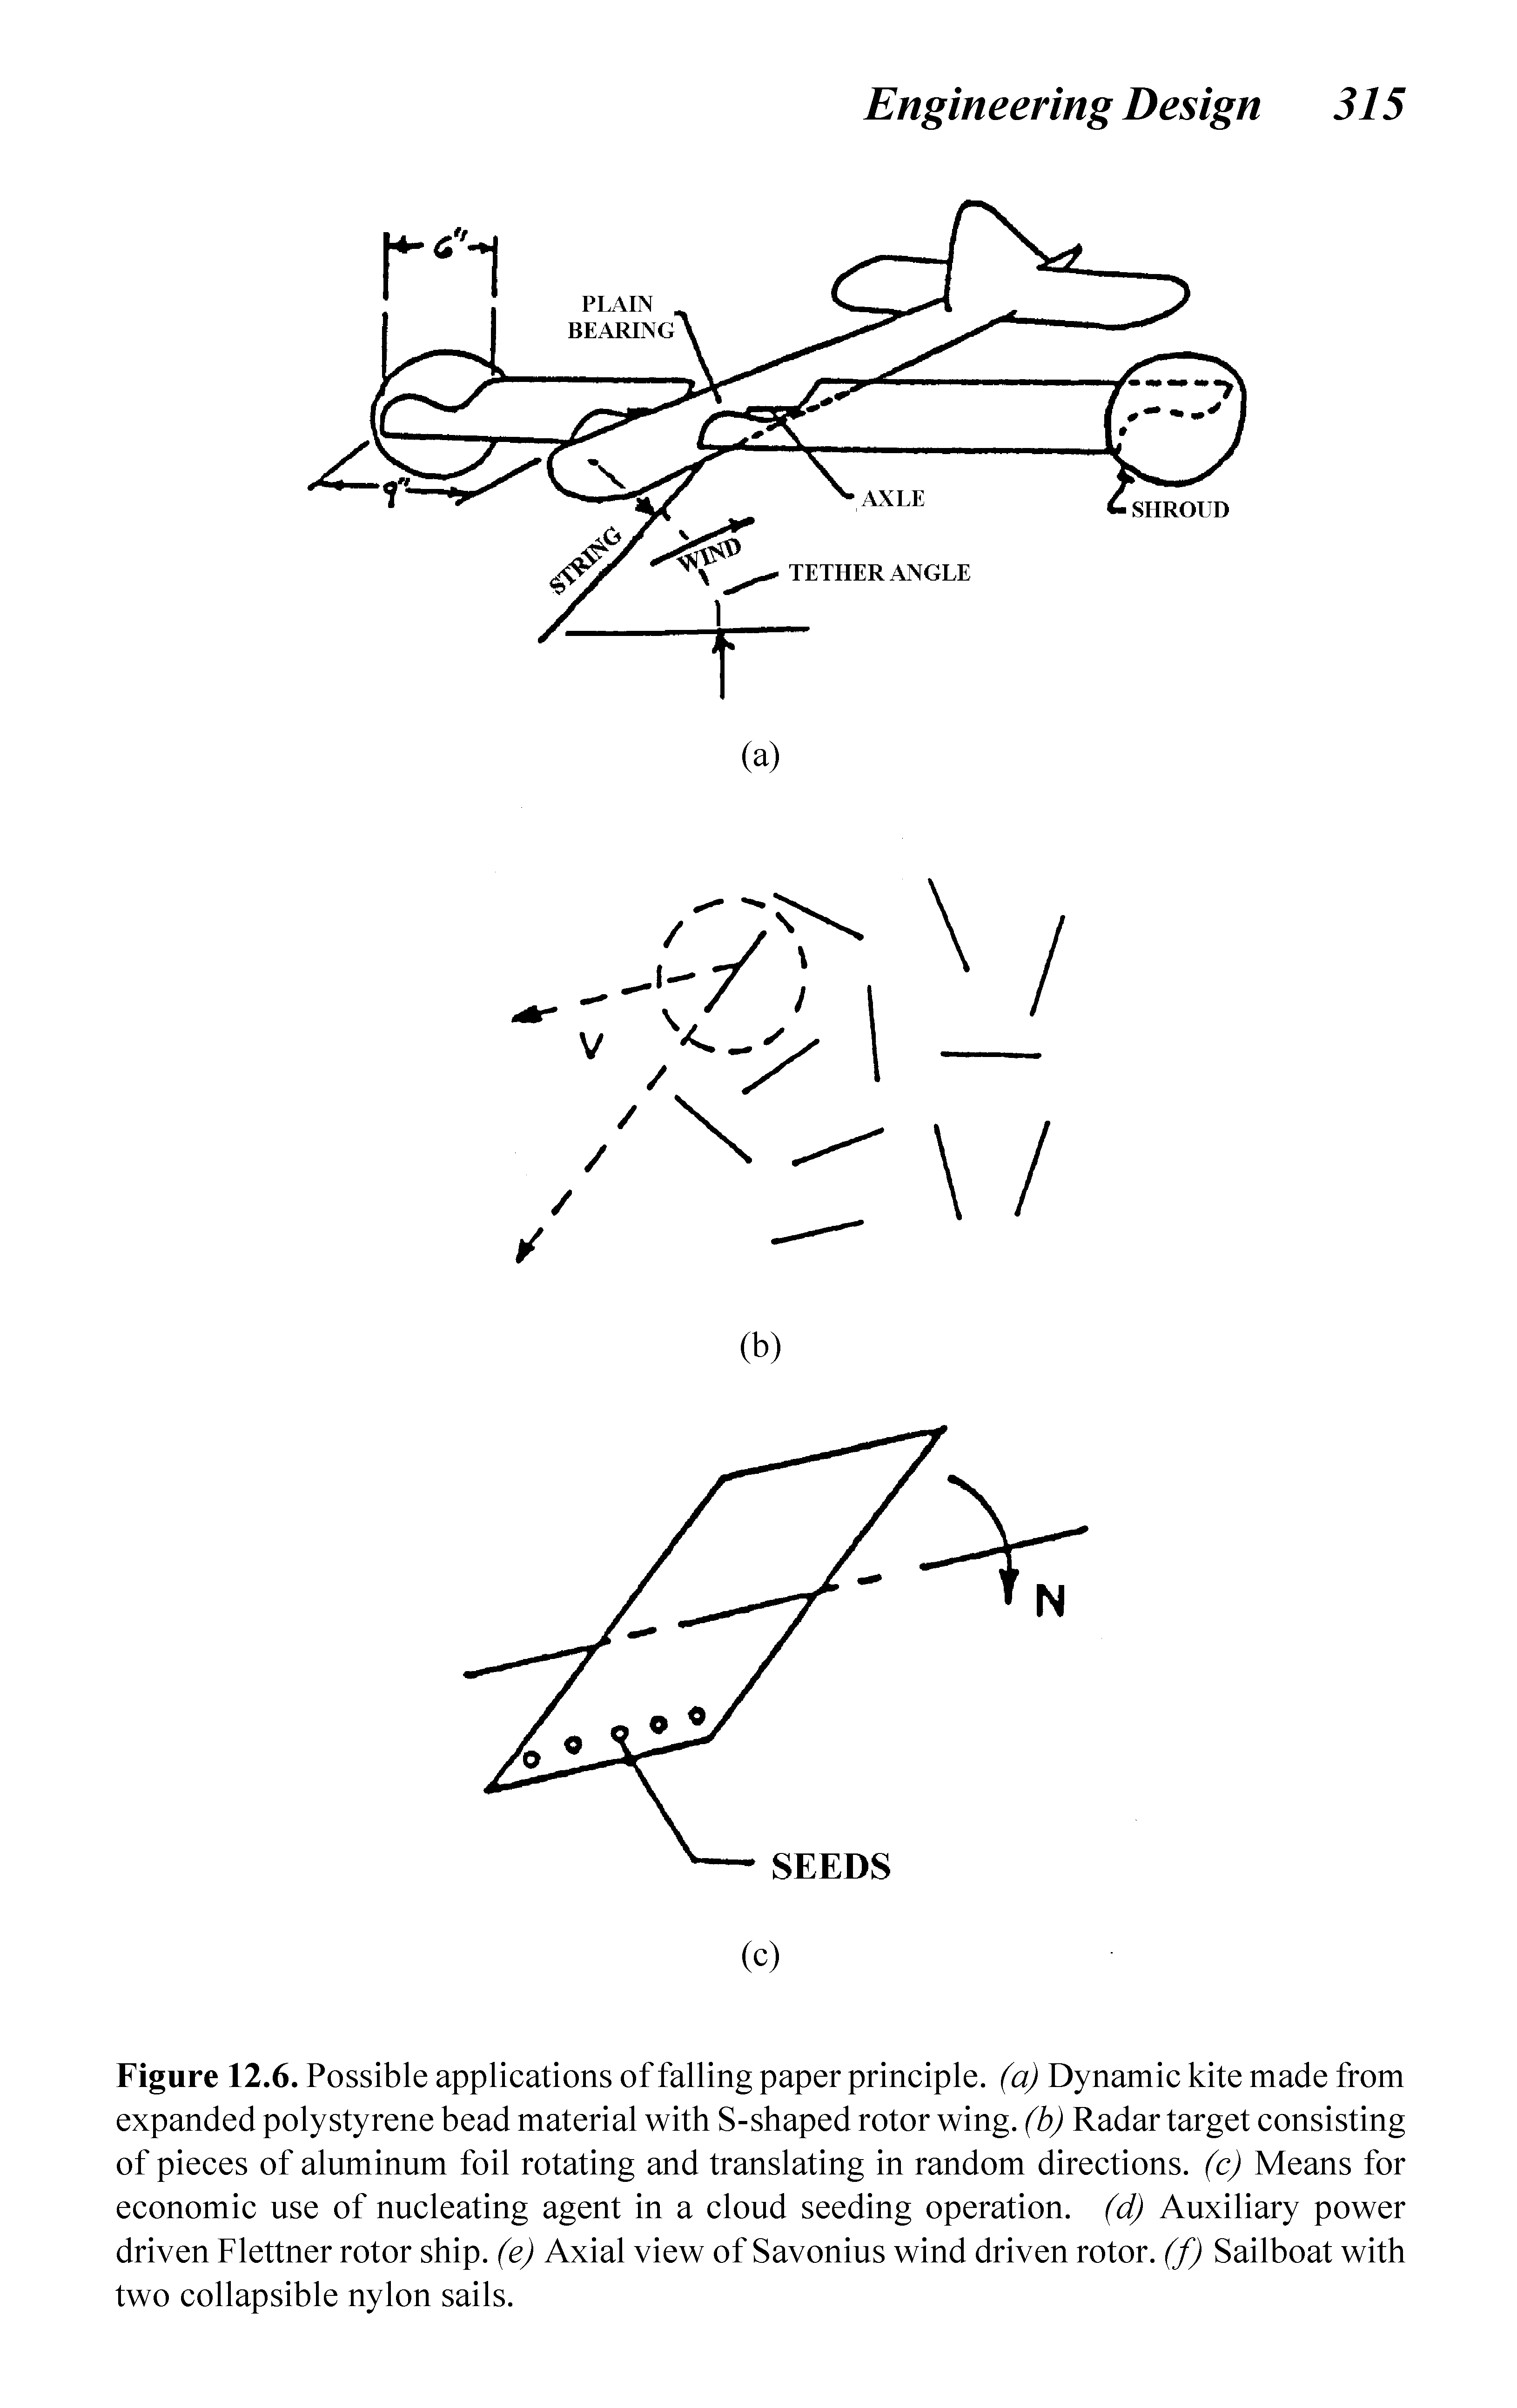 Figure 12.6. Possible applications of falling paper principle, (a) Dynamic kite made from expanded polystyrene bead material with S-shaped rotor wing, (b) Radar target consisting of pieces of aluminum foil rotating and translating in random directions, (c) Means for economic use of nucleating agent in a cloud seeding operation, (d) Auxiliary power driven Flettner rotor ship, (e) Axial view of Savonius wind driven rotor, (f) Sailboat with two collapsible nylon sails.